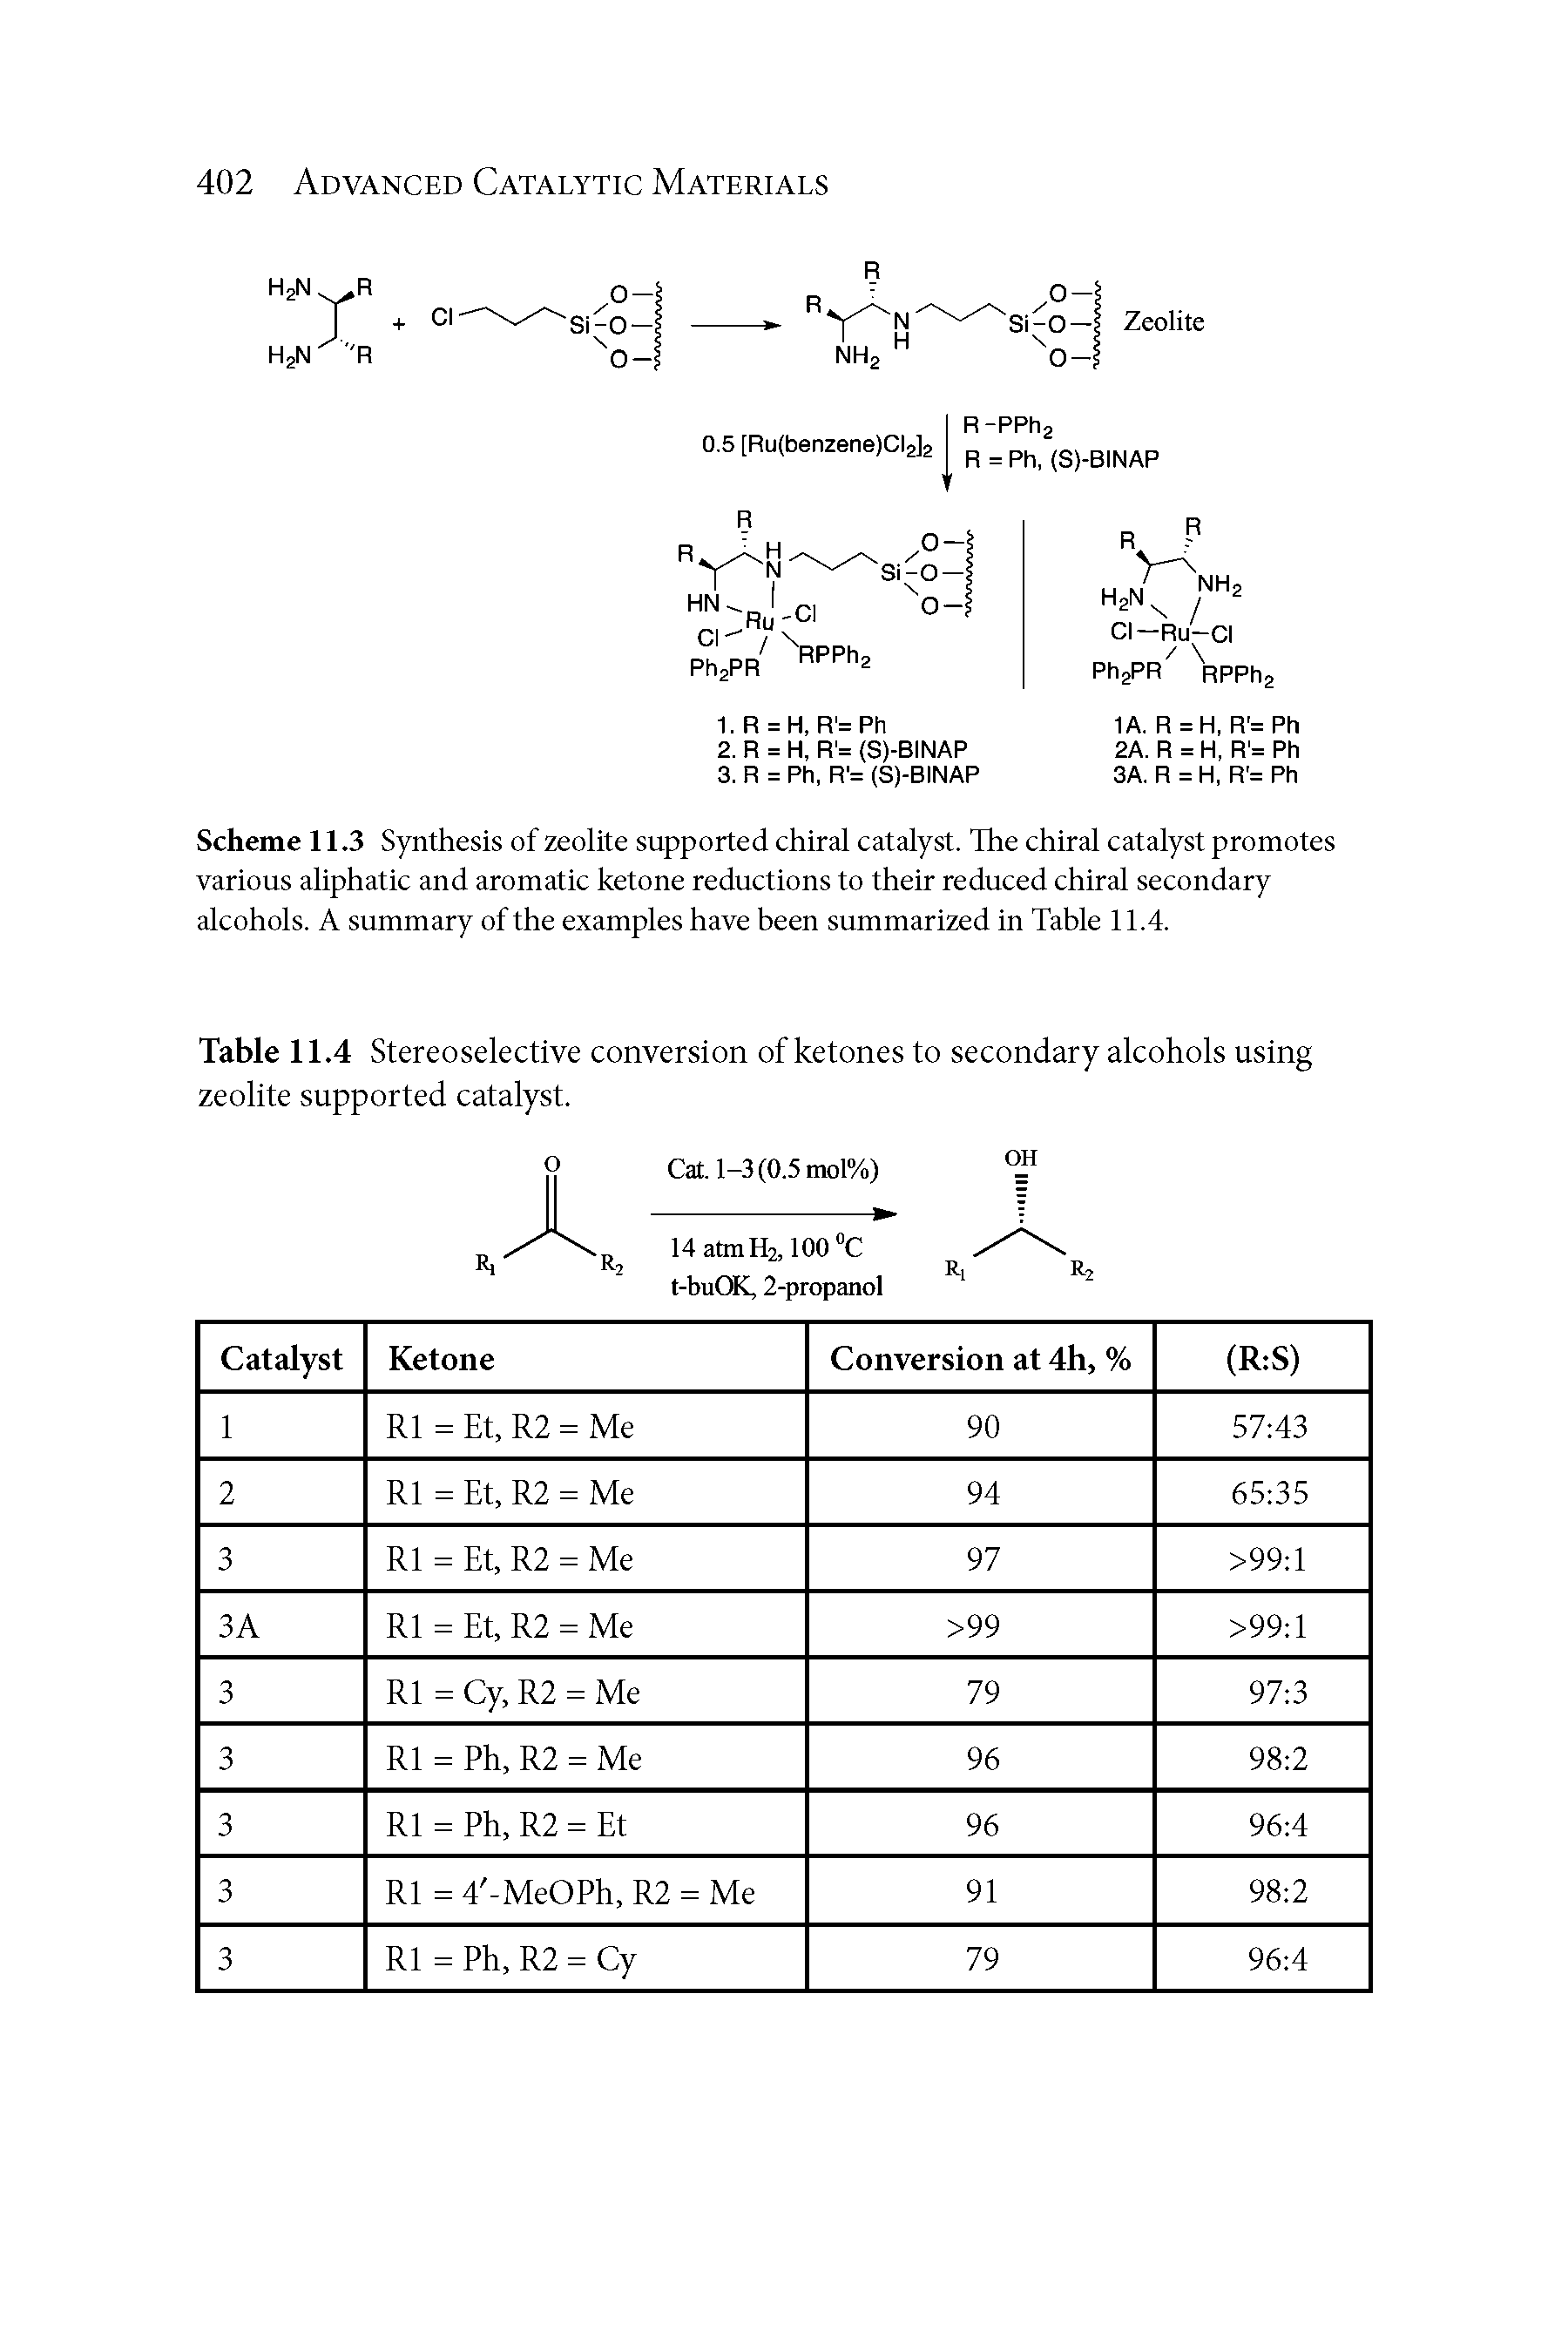 Scheme 11.3 Synthesis of zeolite supported chiral catalyst. The chiral catalyst promotes various aliphatic and aromatic ketone reductions to their reduced chiral secondary alcohols. A summary of the examples have been summarized in Table 11.4.